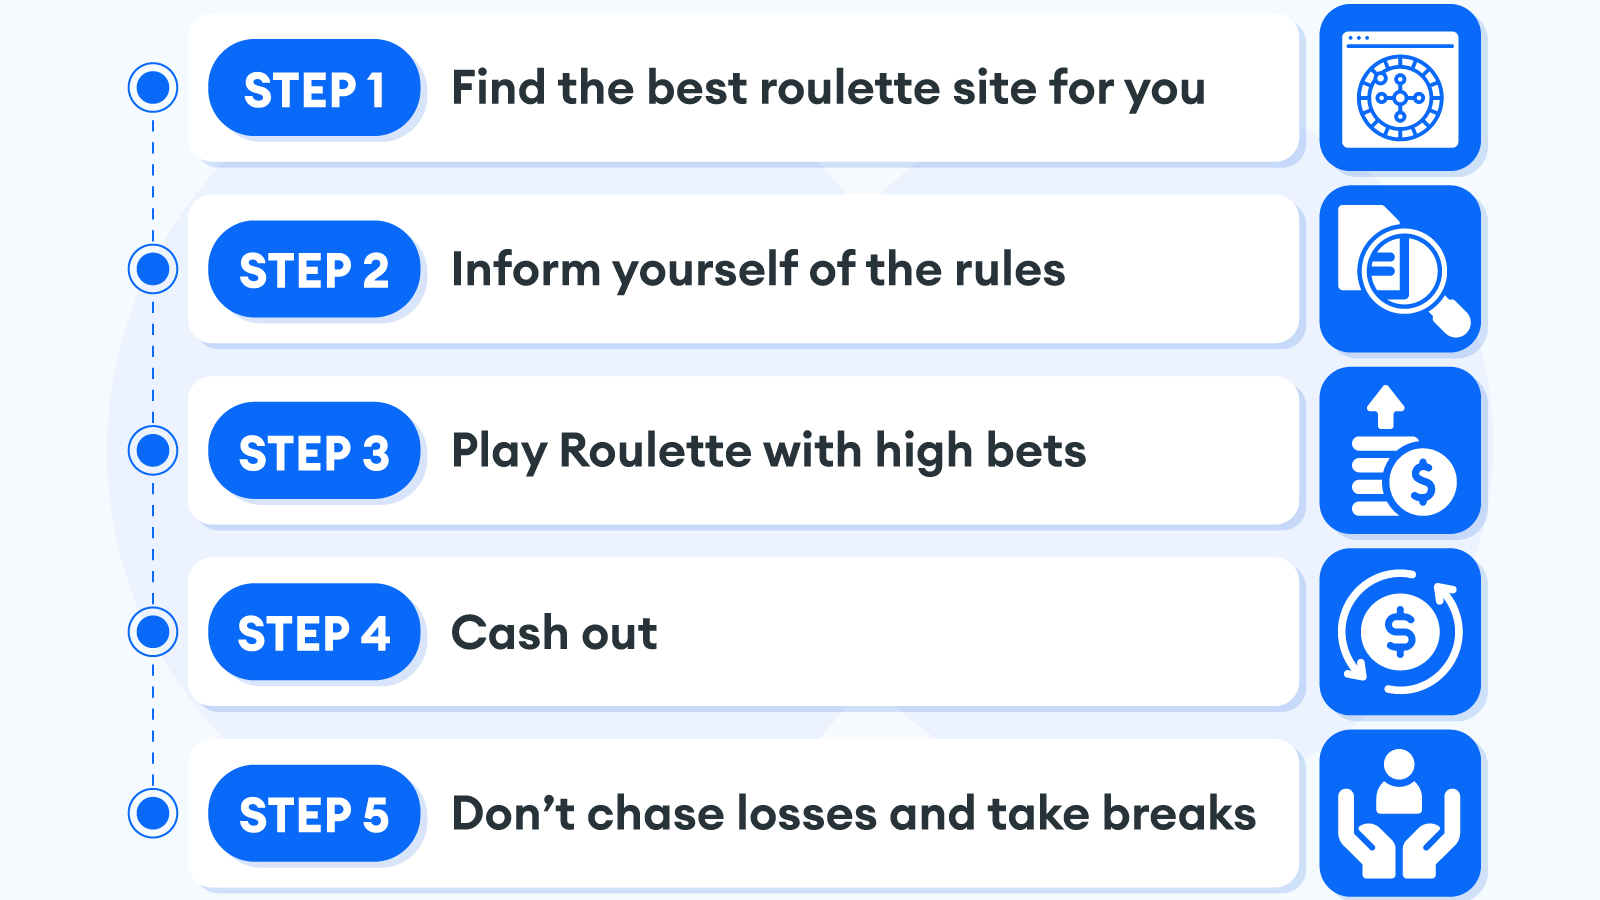 Start Playing Roulette in 5 Steps